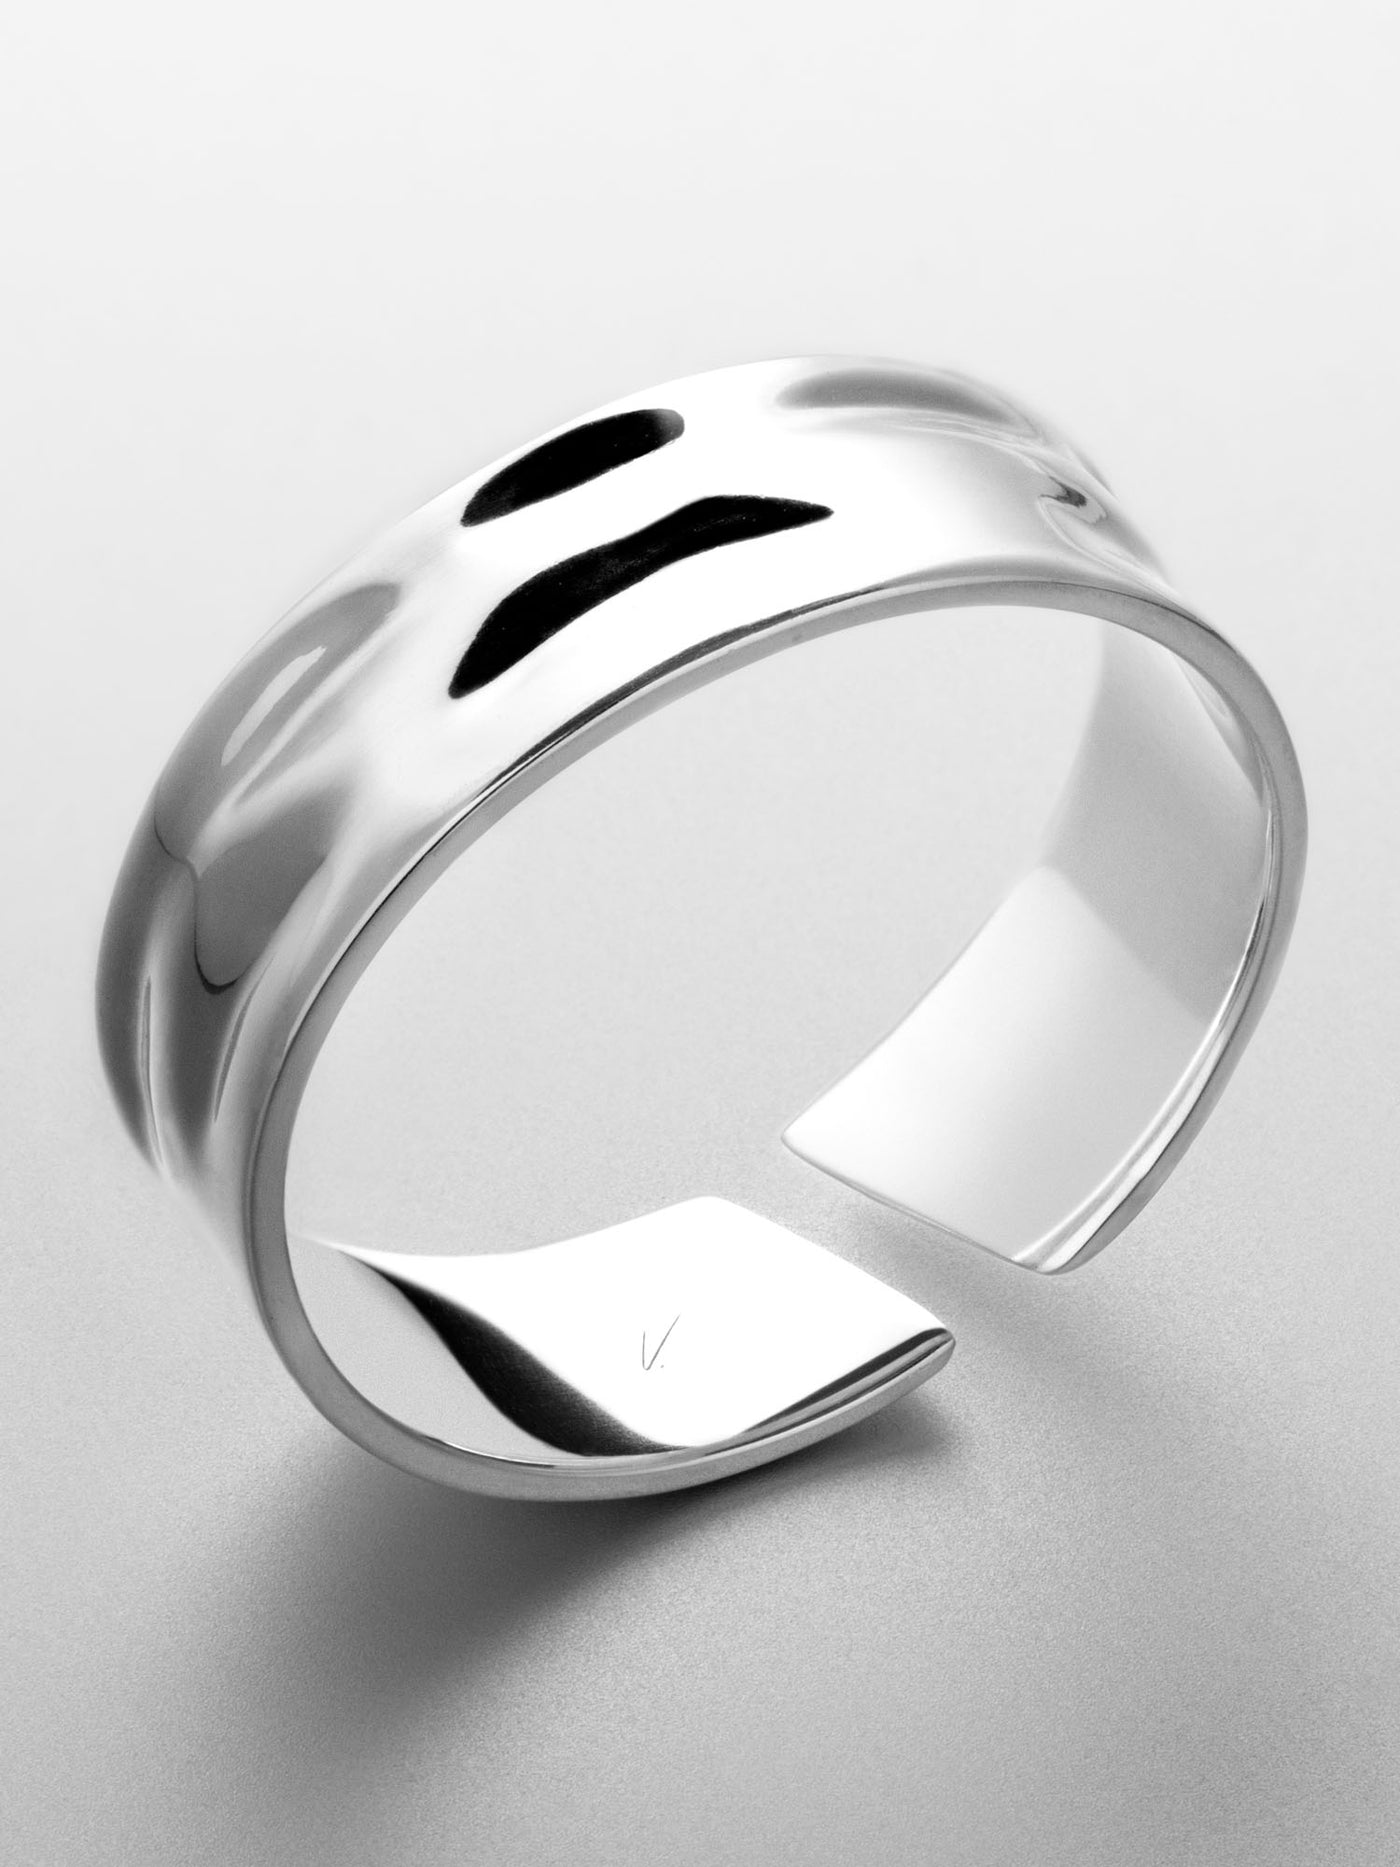 EXKLUSIVER UNISIZE RING IN SILBER